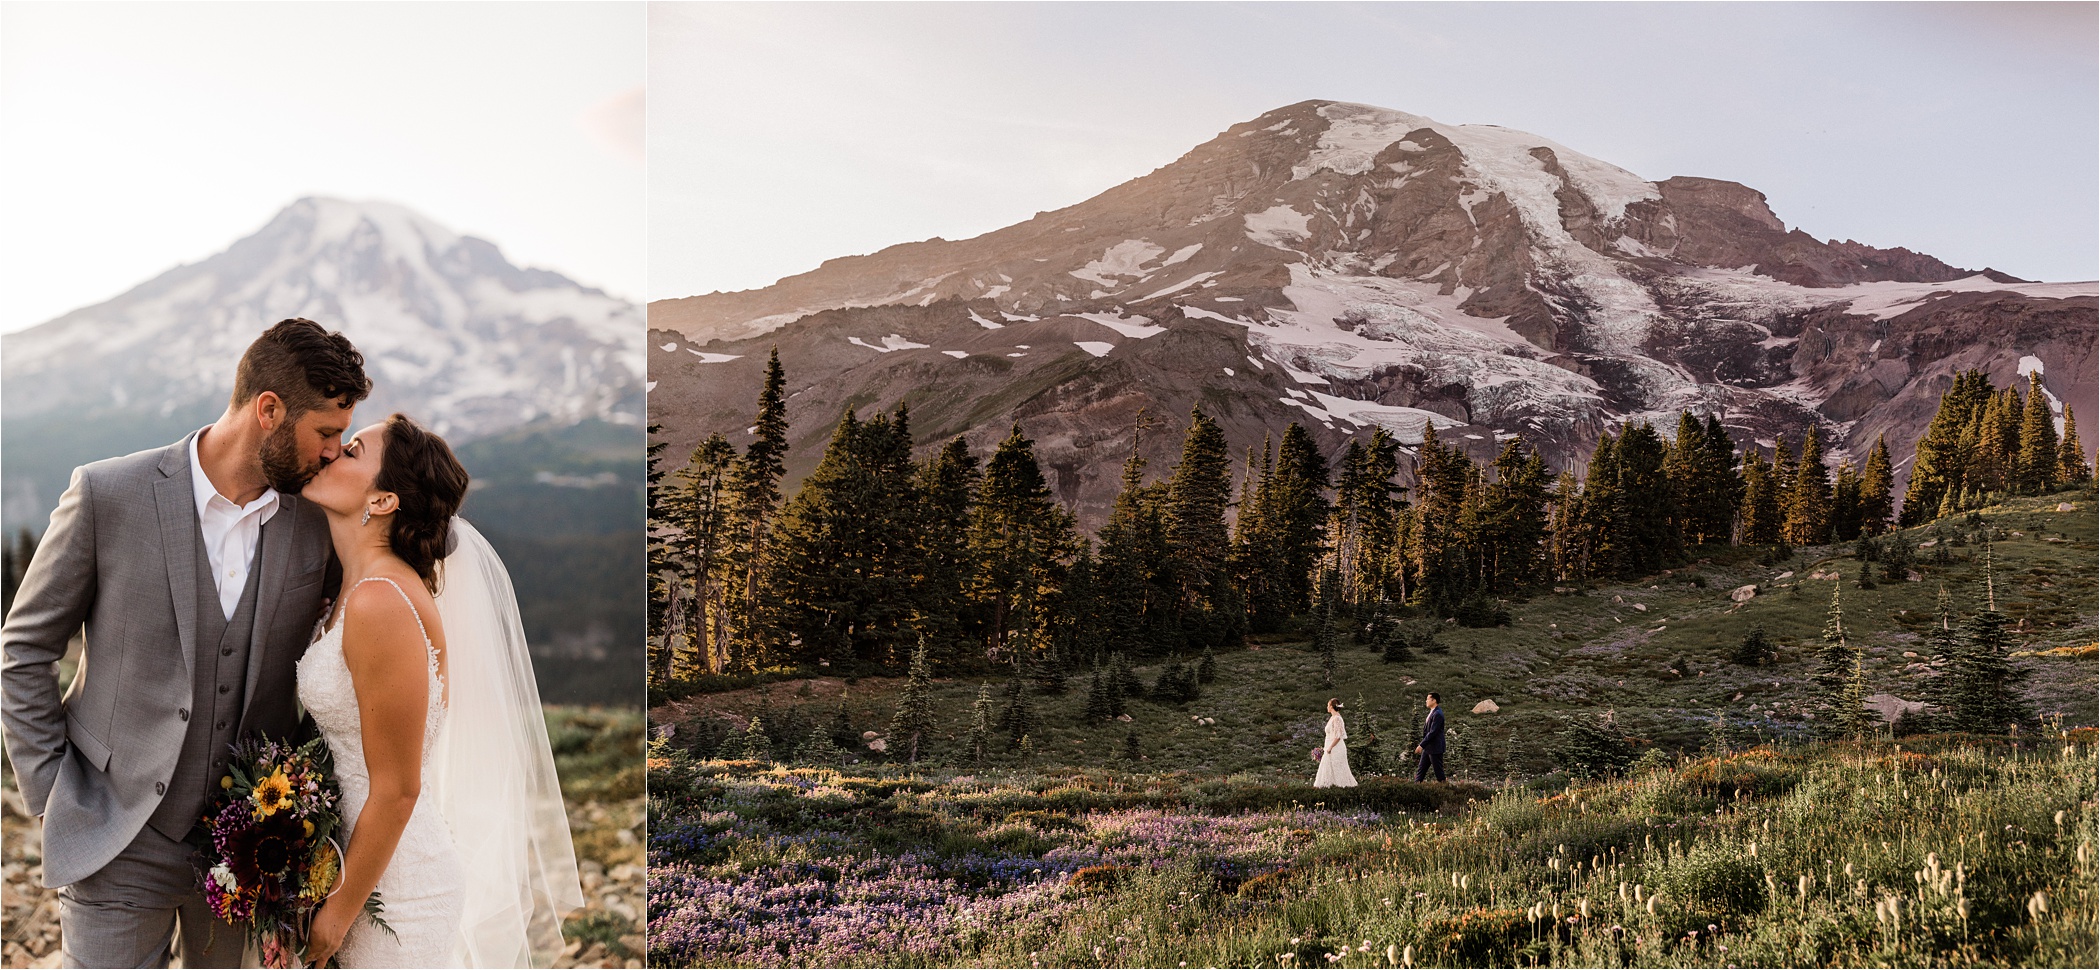 Couples eloping at Paradise one of the best places to get married at Rainier